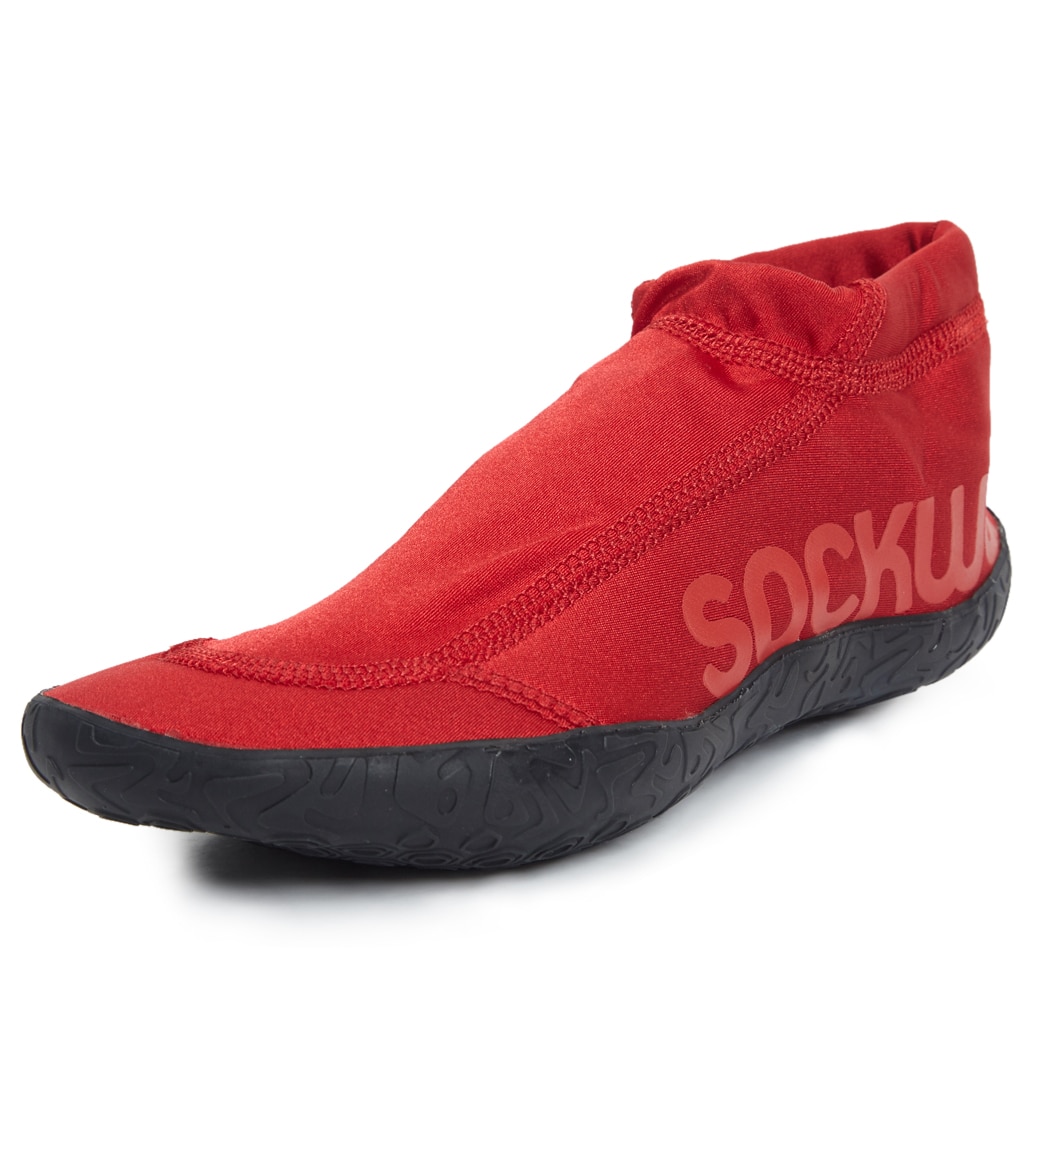 Sockwa G4 Water Shoe - Red W6/M5 - Swimoutlet.com